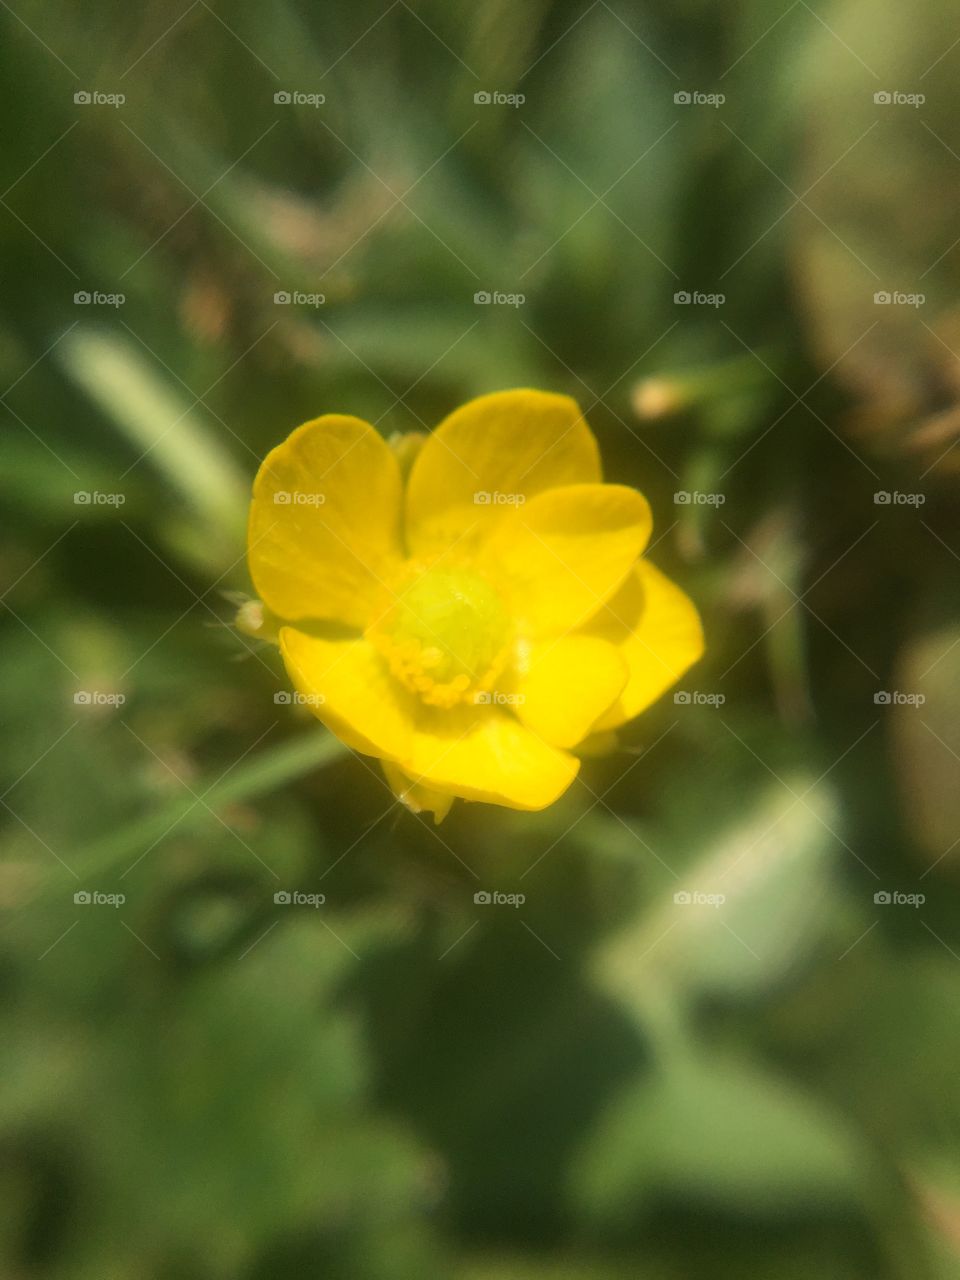 The lone buttercup